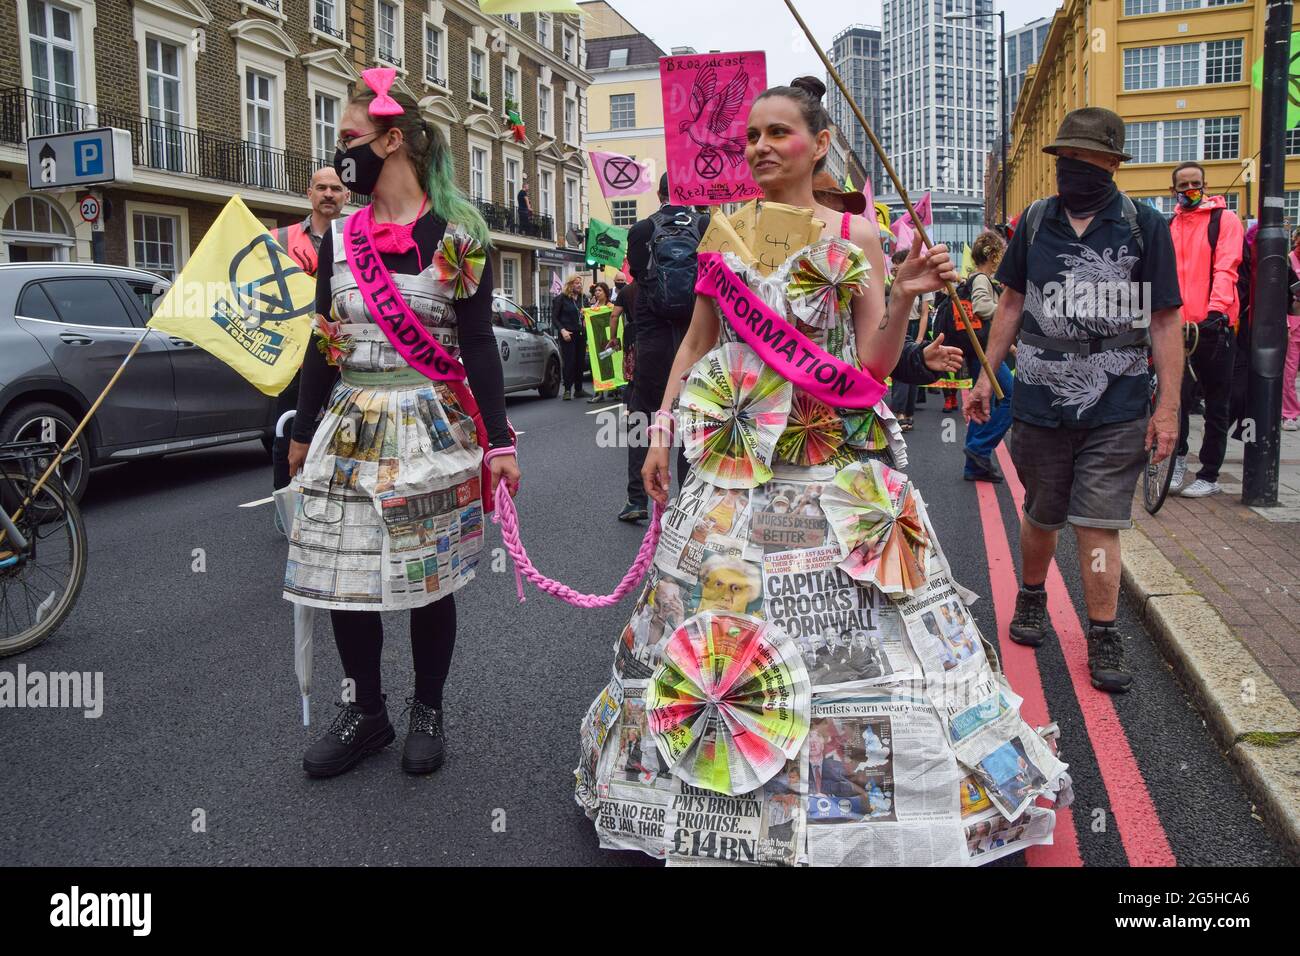 London, UK. 27th June, 2021. Demonstrators wearing dresses made of newspapers march during the Free The Press protest.Extinction Rebellion demonstrators marched from Parliament Square to News UK headquarters, owned by Rupert Murdoch, in protest of corruption, and the inaccurate and insufficient coverage of the climate and environmental crisis by several major UK newspapers owned by billionaires. (Photo by Vuk Valcic/SOPA Images/Sipa USA) Credit: Sipa USA/Alamy Live News Stock Photo